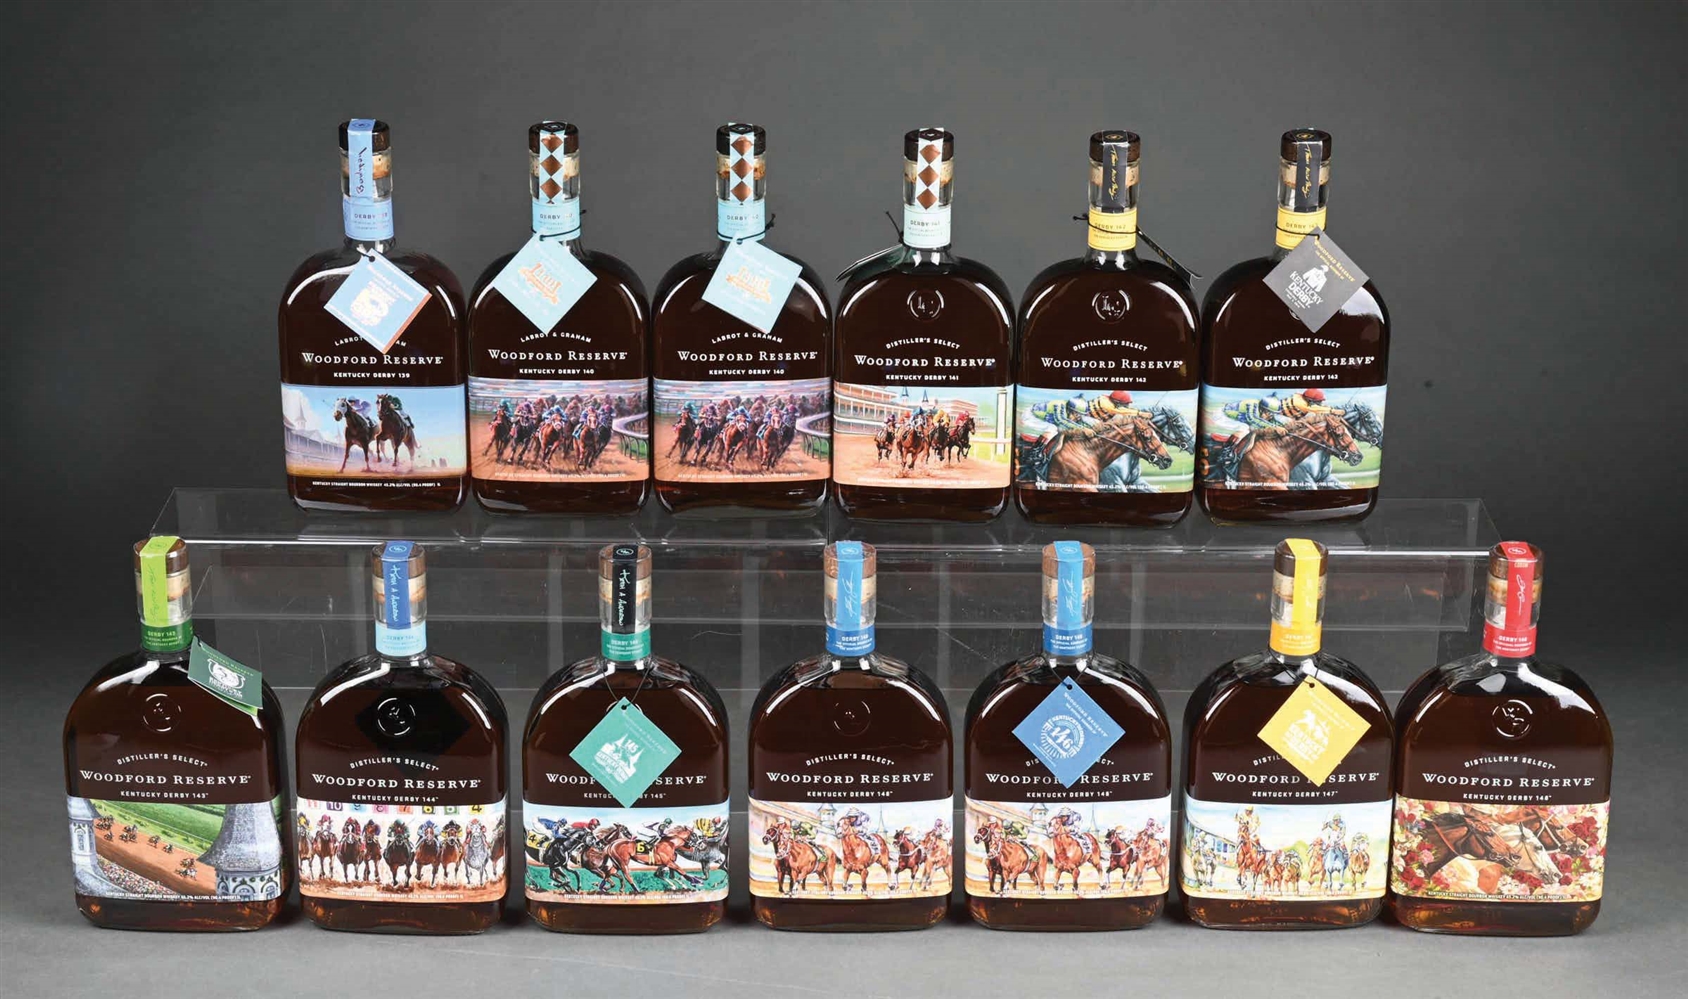 LOT OF 13: LABROT & GRAHAM WOODFORD RESERVE SPECIAL EDITION 1 LITER DERBY BOTTLES